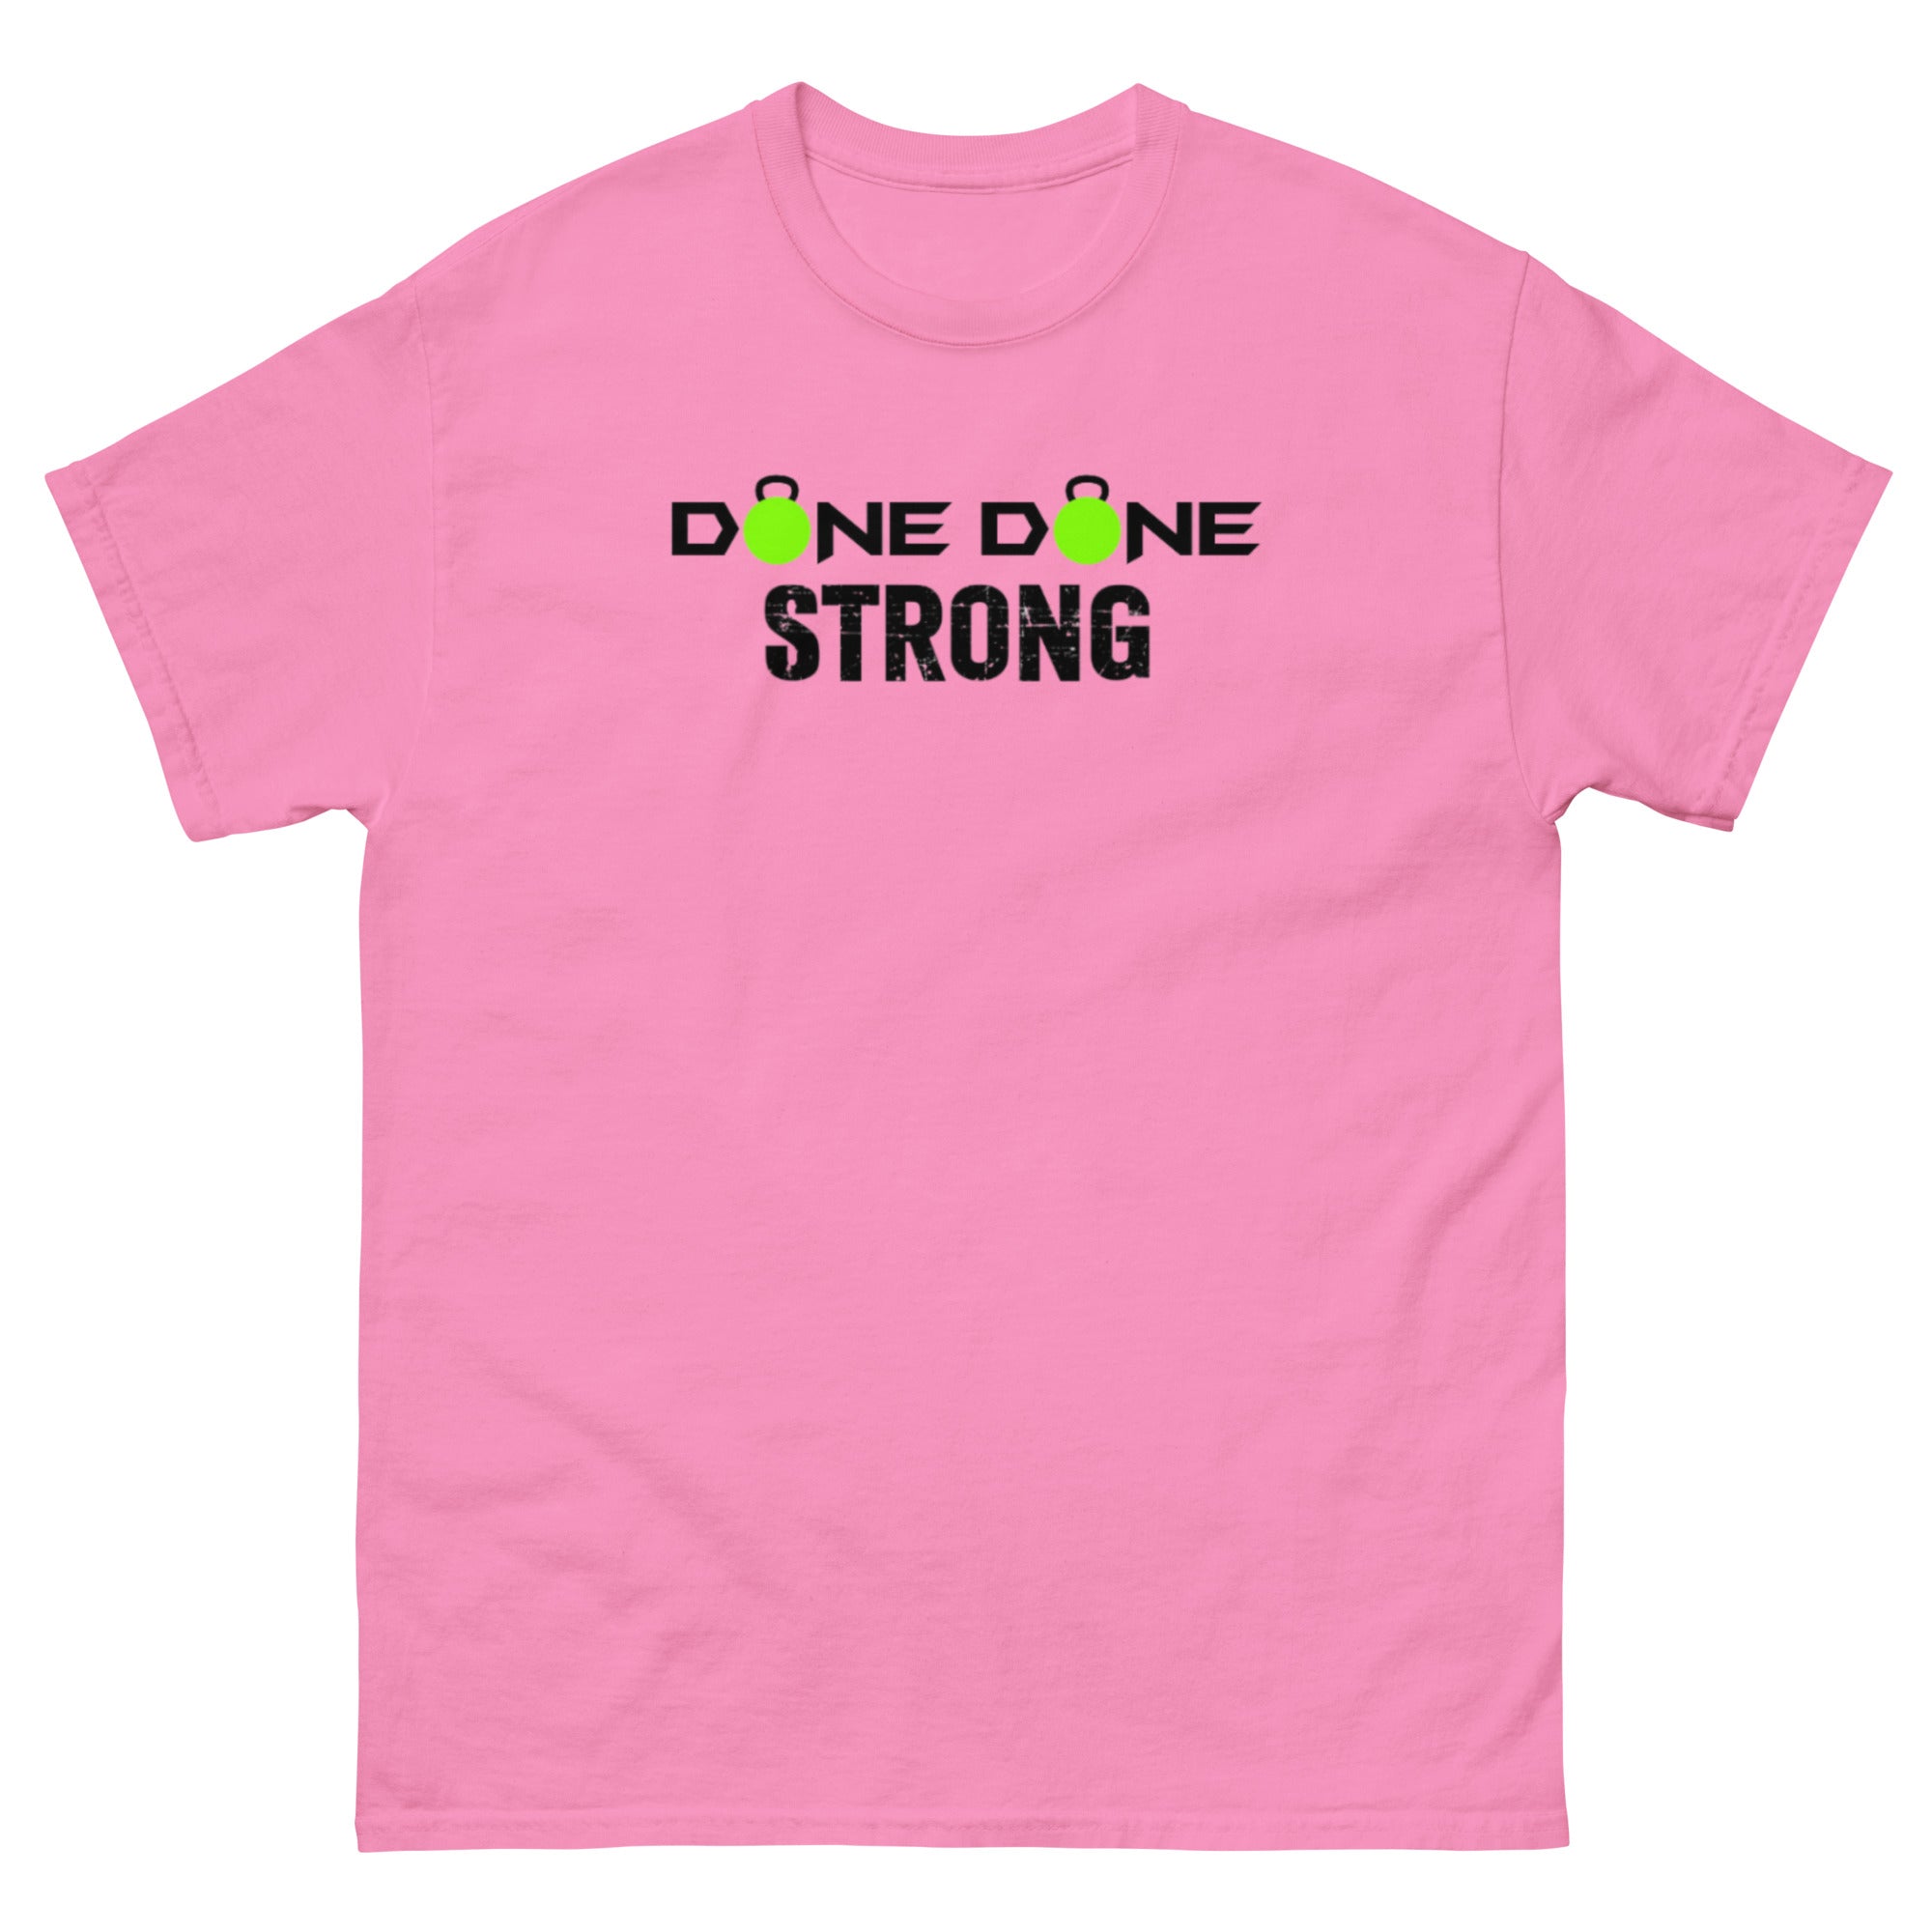 Done Done Strong Men's classic tee